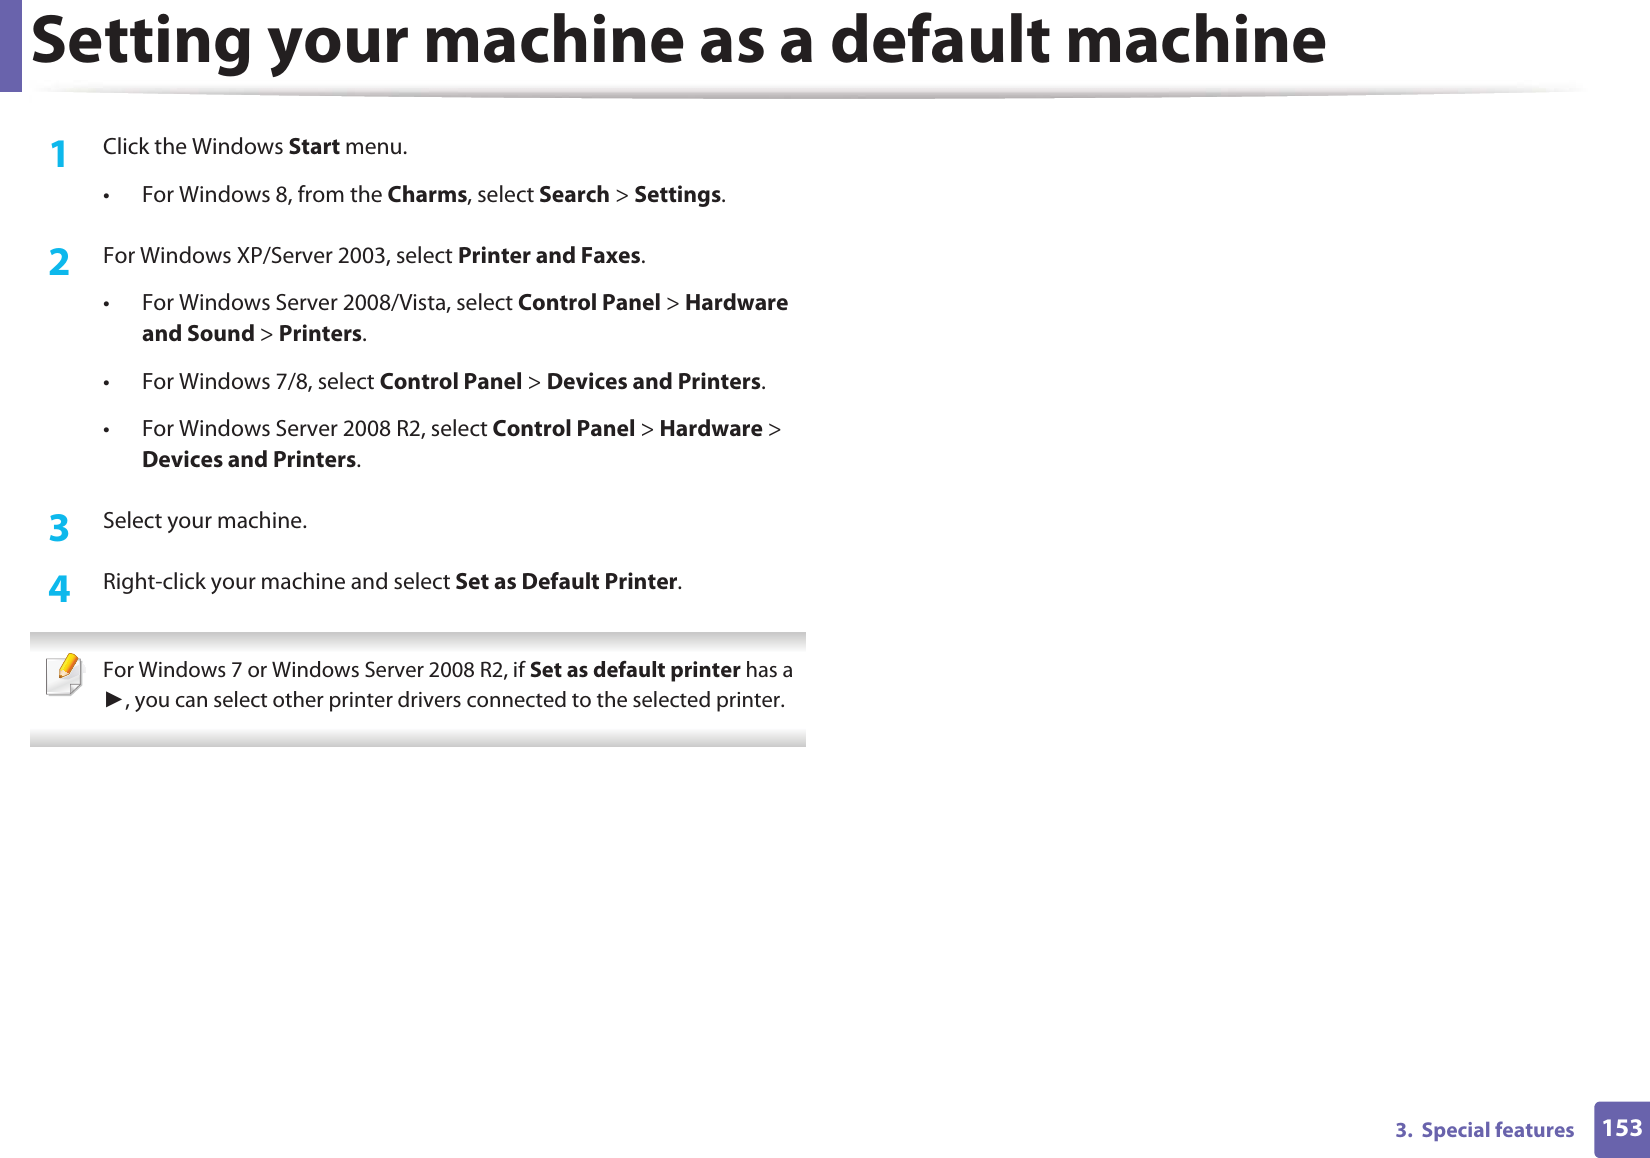 1533.  Special featuresSetting your machine as a default machine1Click the Windows Start menu.• For Windows 8, from the Charms, select Search &gt; Settings.2  For Windows XP/Server 2003, select Printer and Faxes. • For Windows Server 2008/Vista, select Control Panel &gt; Hardware and Sound &gt; Printers. • For Windows 7/8, select Control Panel &gt; Devices and Printers. • For Windows Server 2008 R2, select Control Panel &gt; Hardware &gt; Devices and Printers. 3  Select your machine.4  Right-click your machine and select Set as Default Printer. For Windows 7 or Windows Server 2008 R2, if Set as default printer has a Ź, you can select other printer drivers connected to the selected printer. 